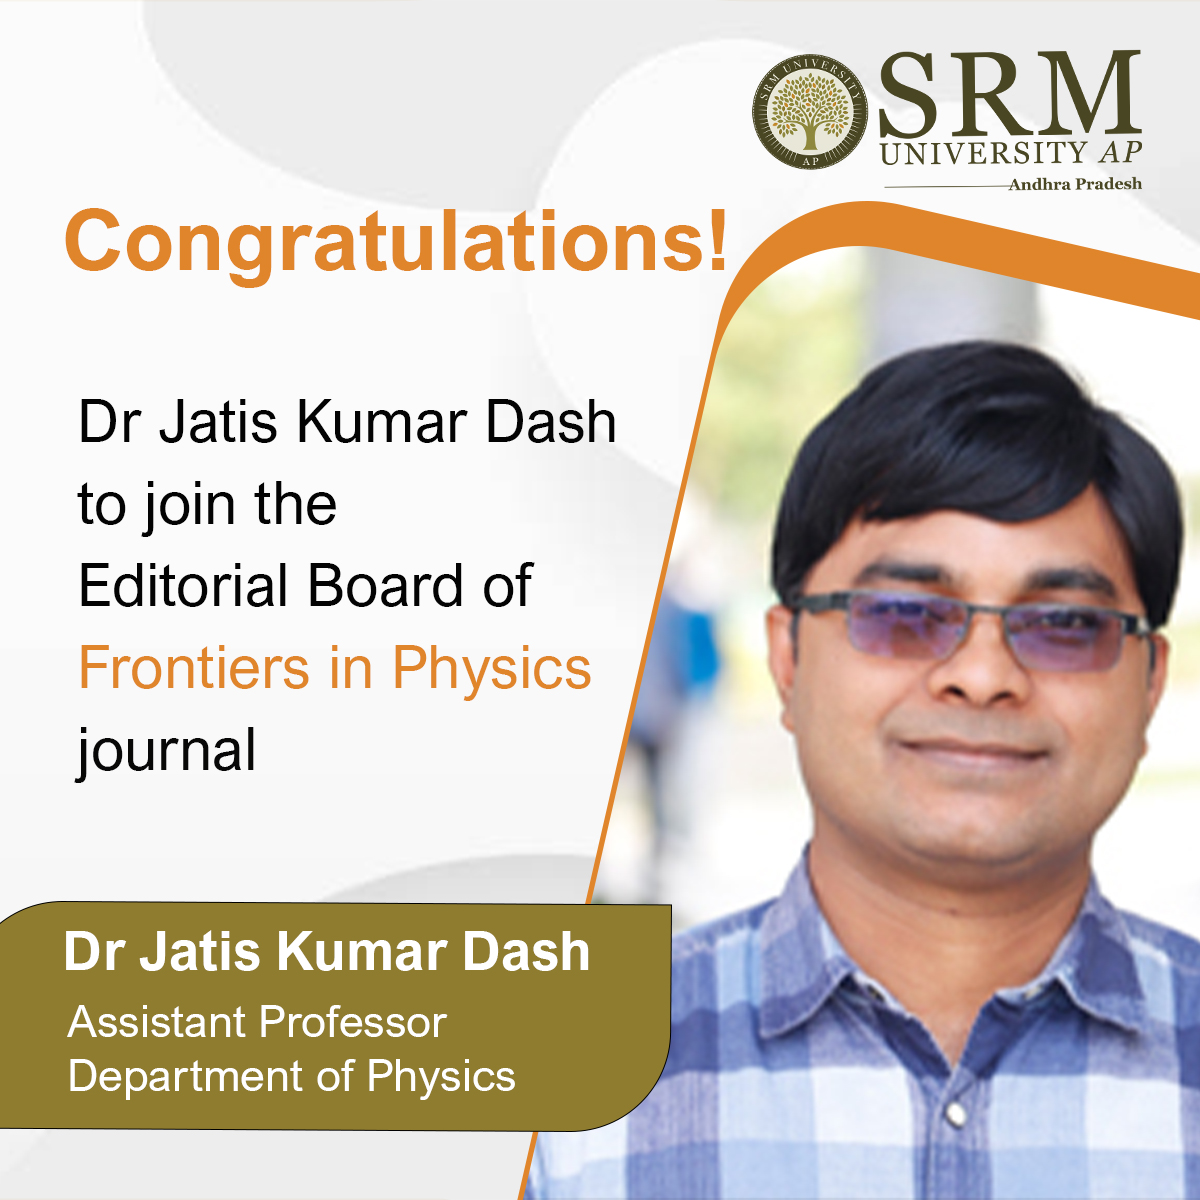 Dr Jatis Kumar Dash to join the Editorial Board of Frontiers in Physics journal